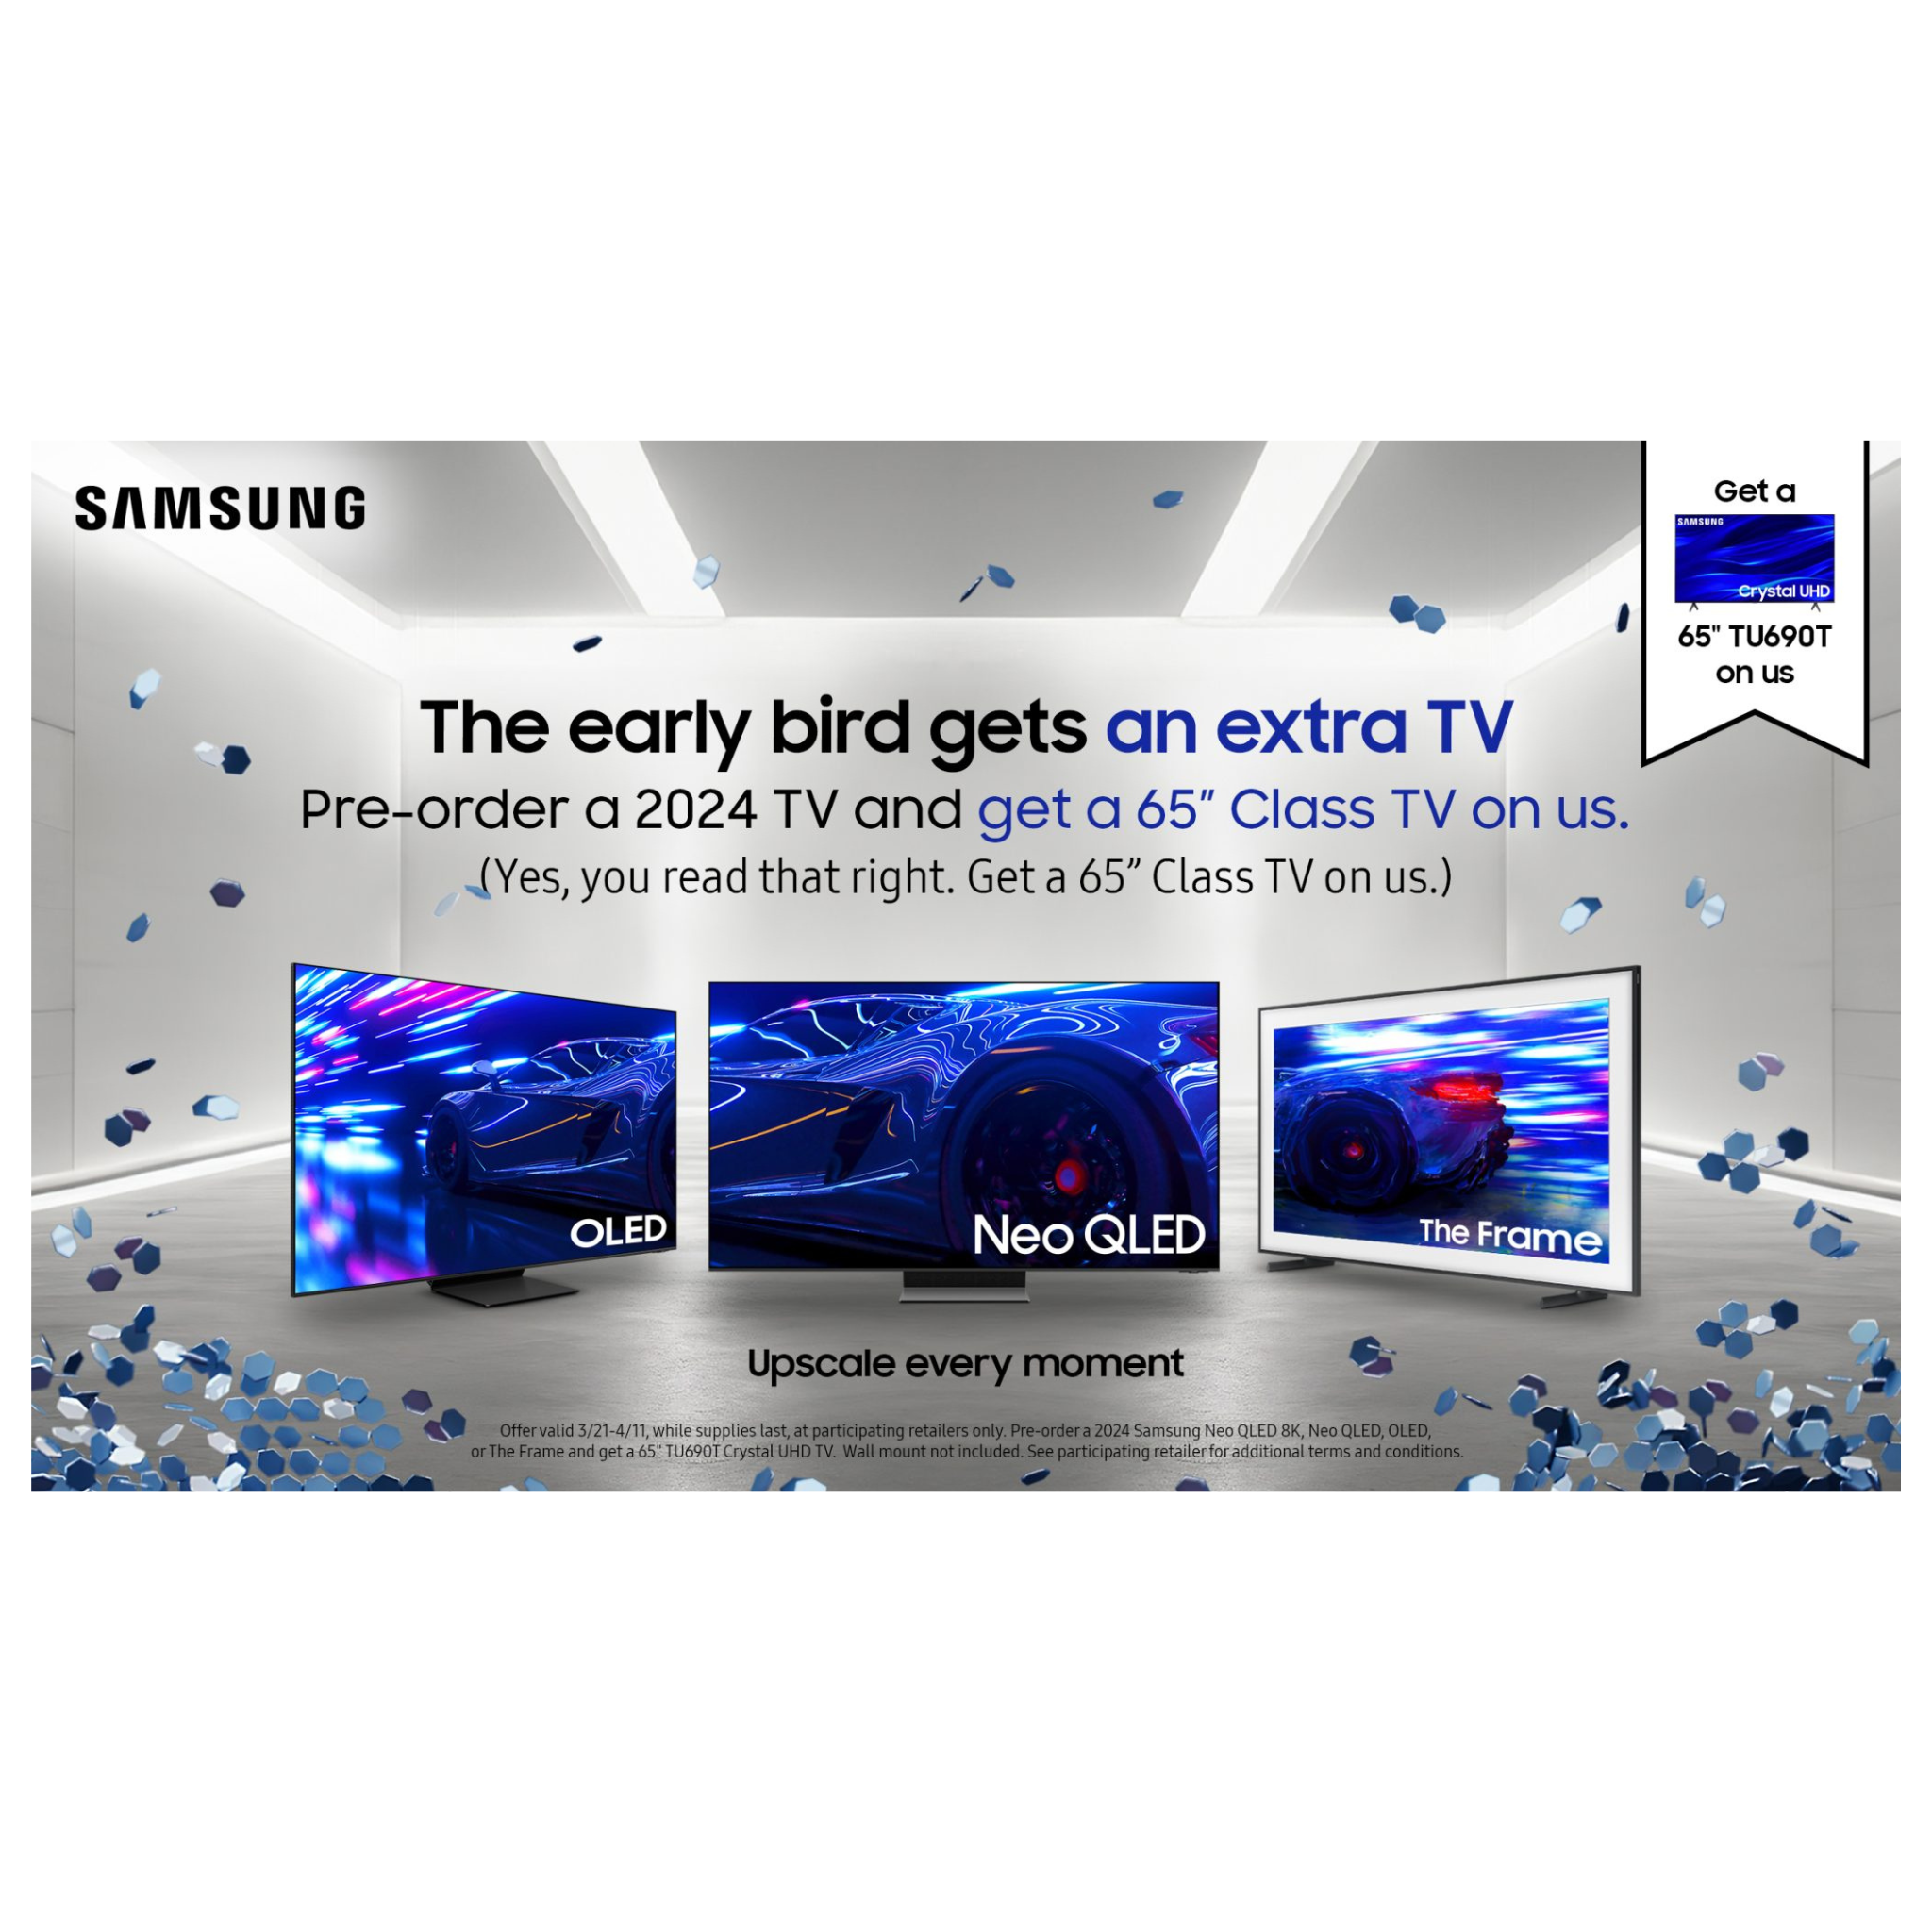 Free 65" 4K UHD TV With Samsung TV Pre-order